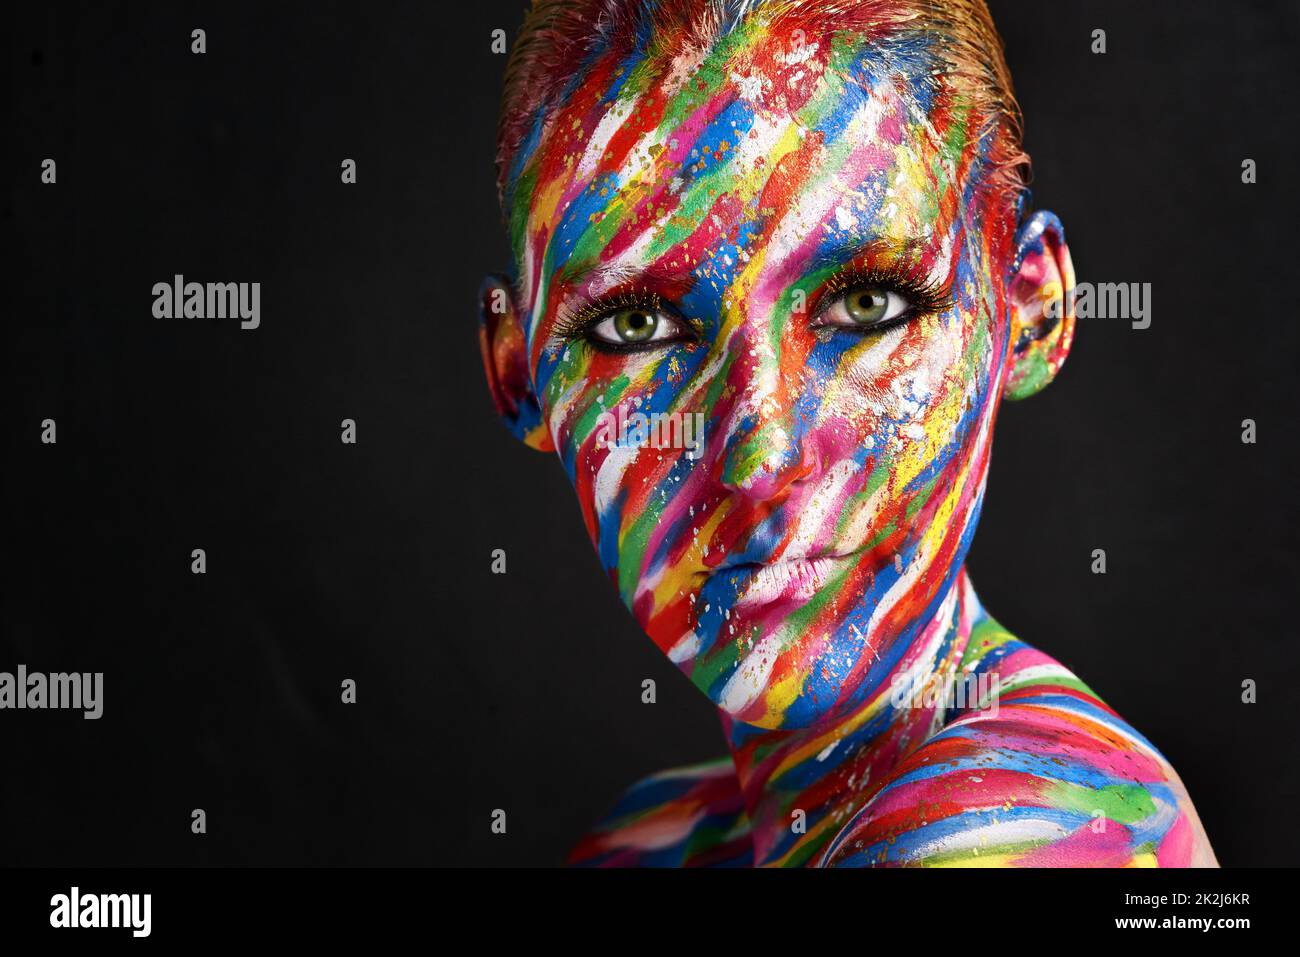 She finds beauty in color. Studio shot of a young woman posing with brightly colored paint on her face against a black background. Stock Photo